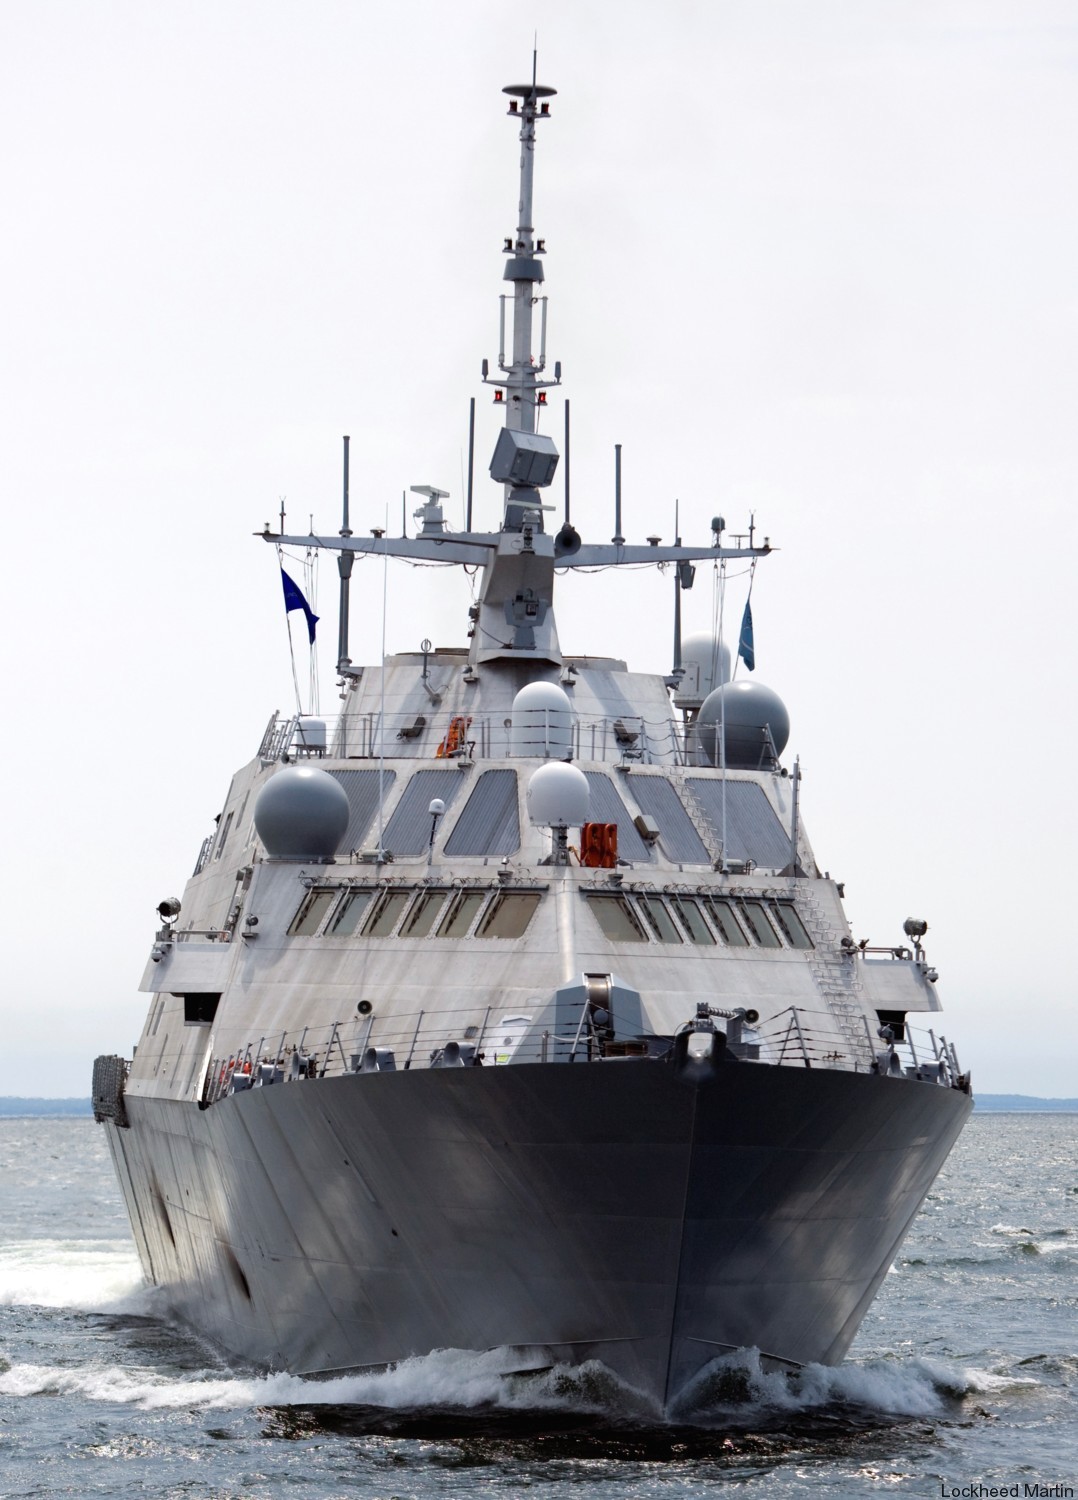 lcs-1 uss freedom class littoral combat ship us navy 133